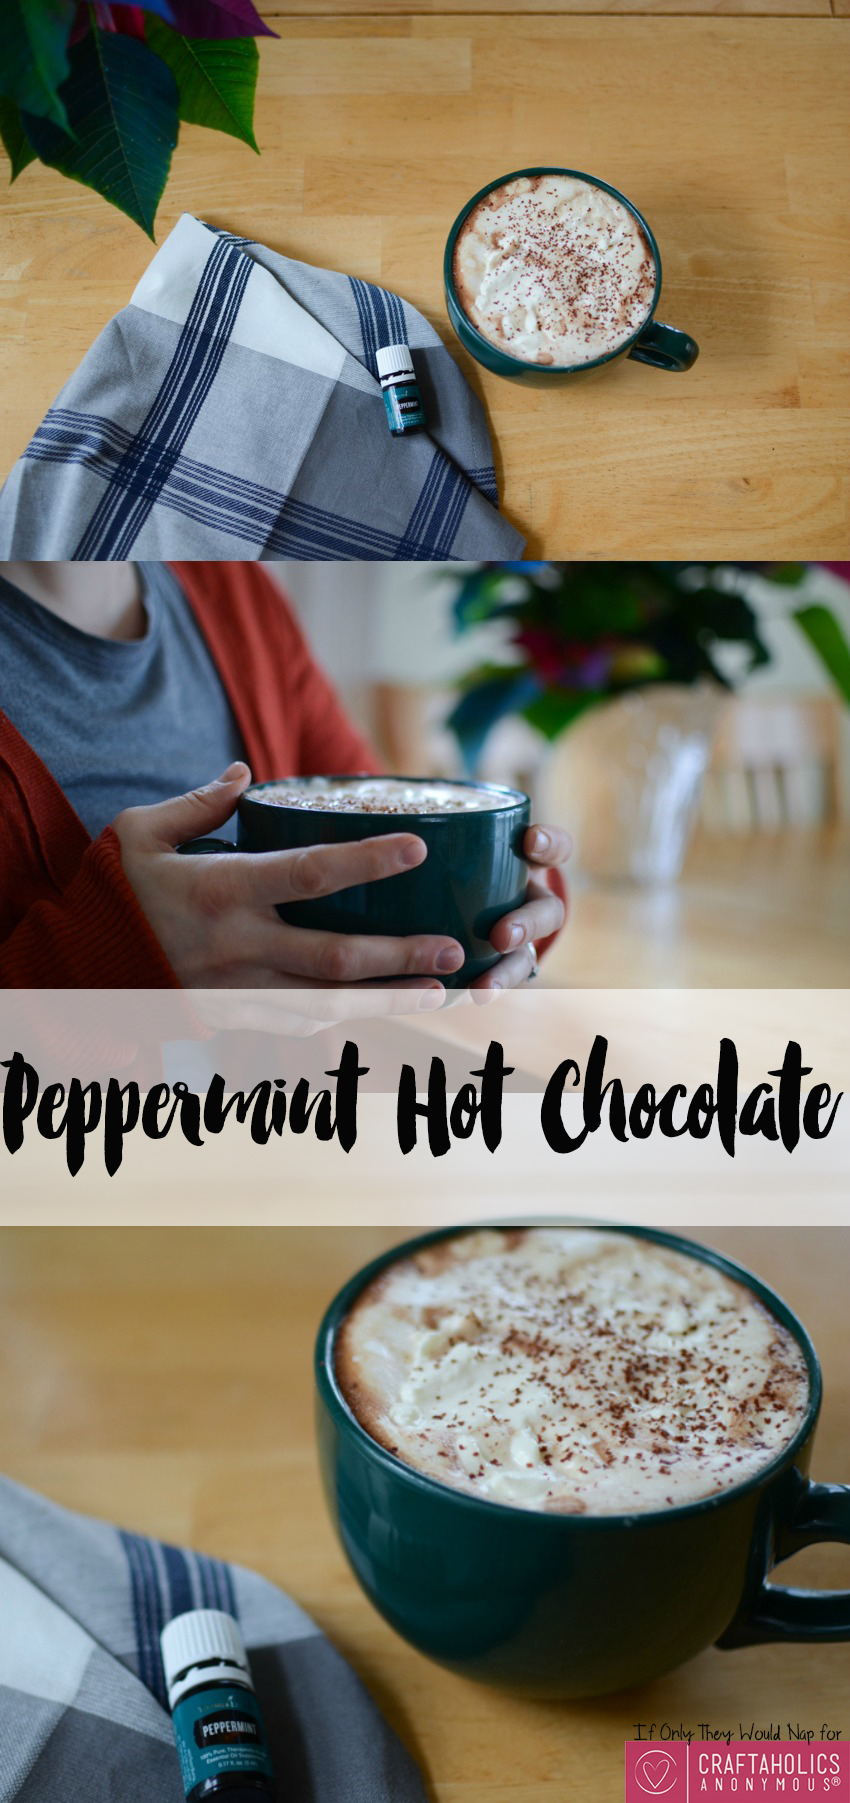 The yummiest Peppermint Hot Chocolate recipe you'll ever taste